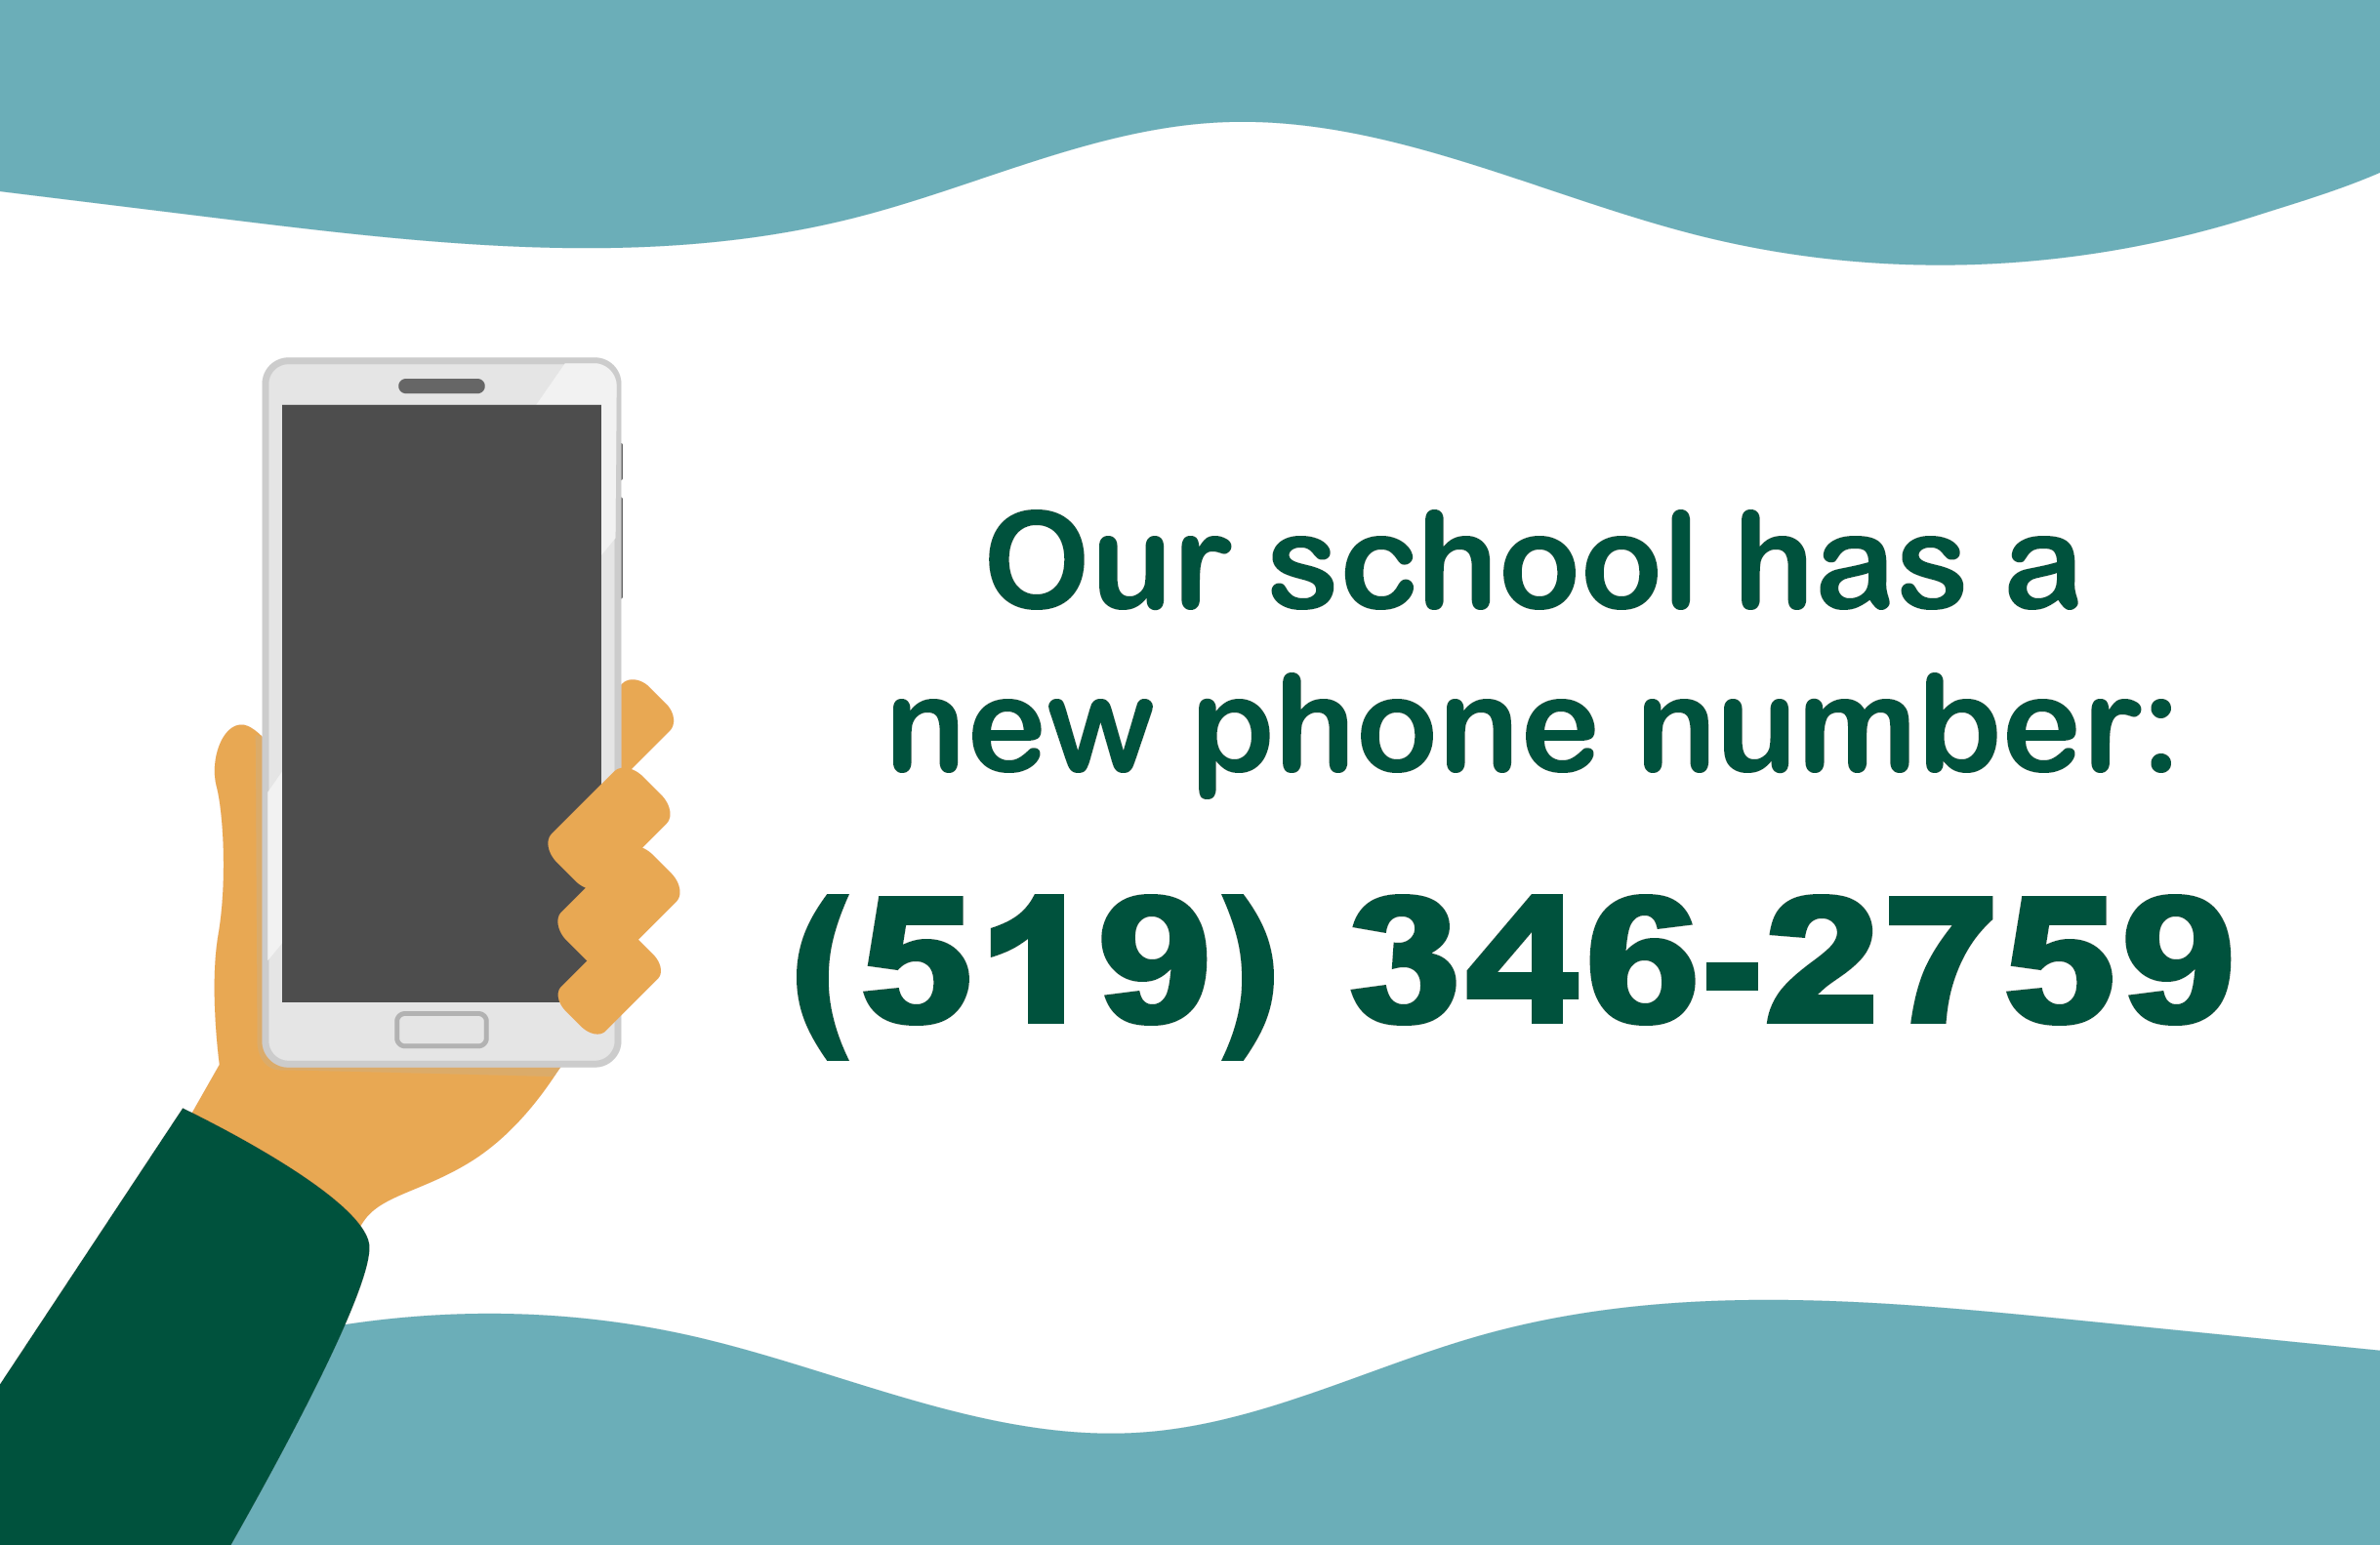 Grand Bend PS has a new number